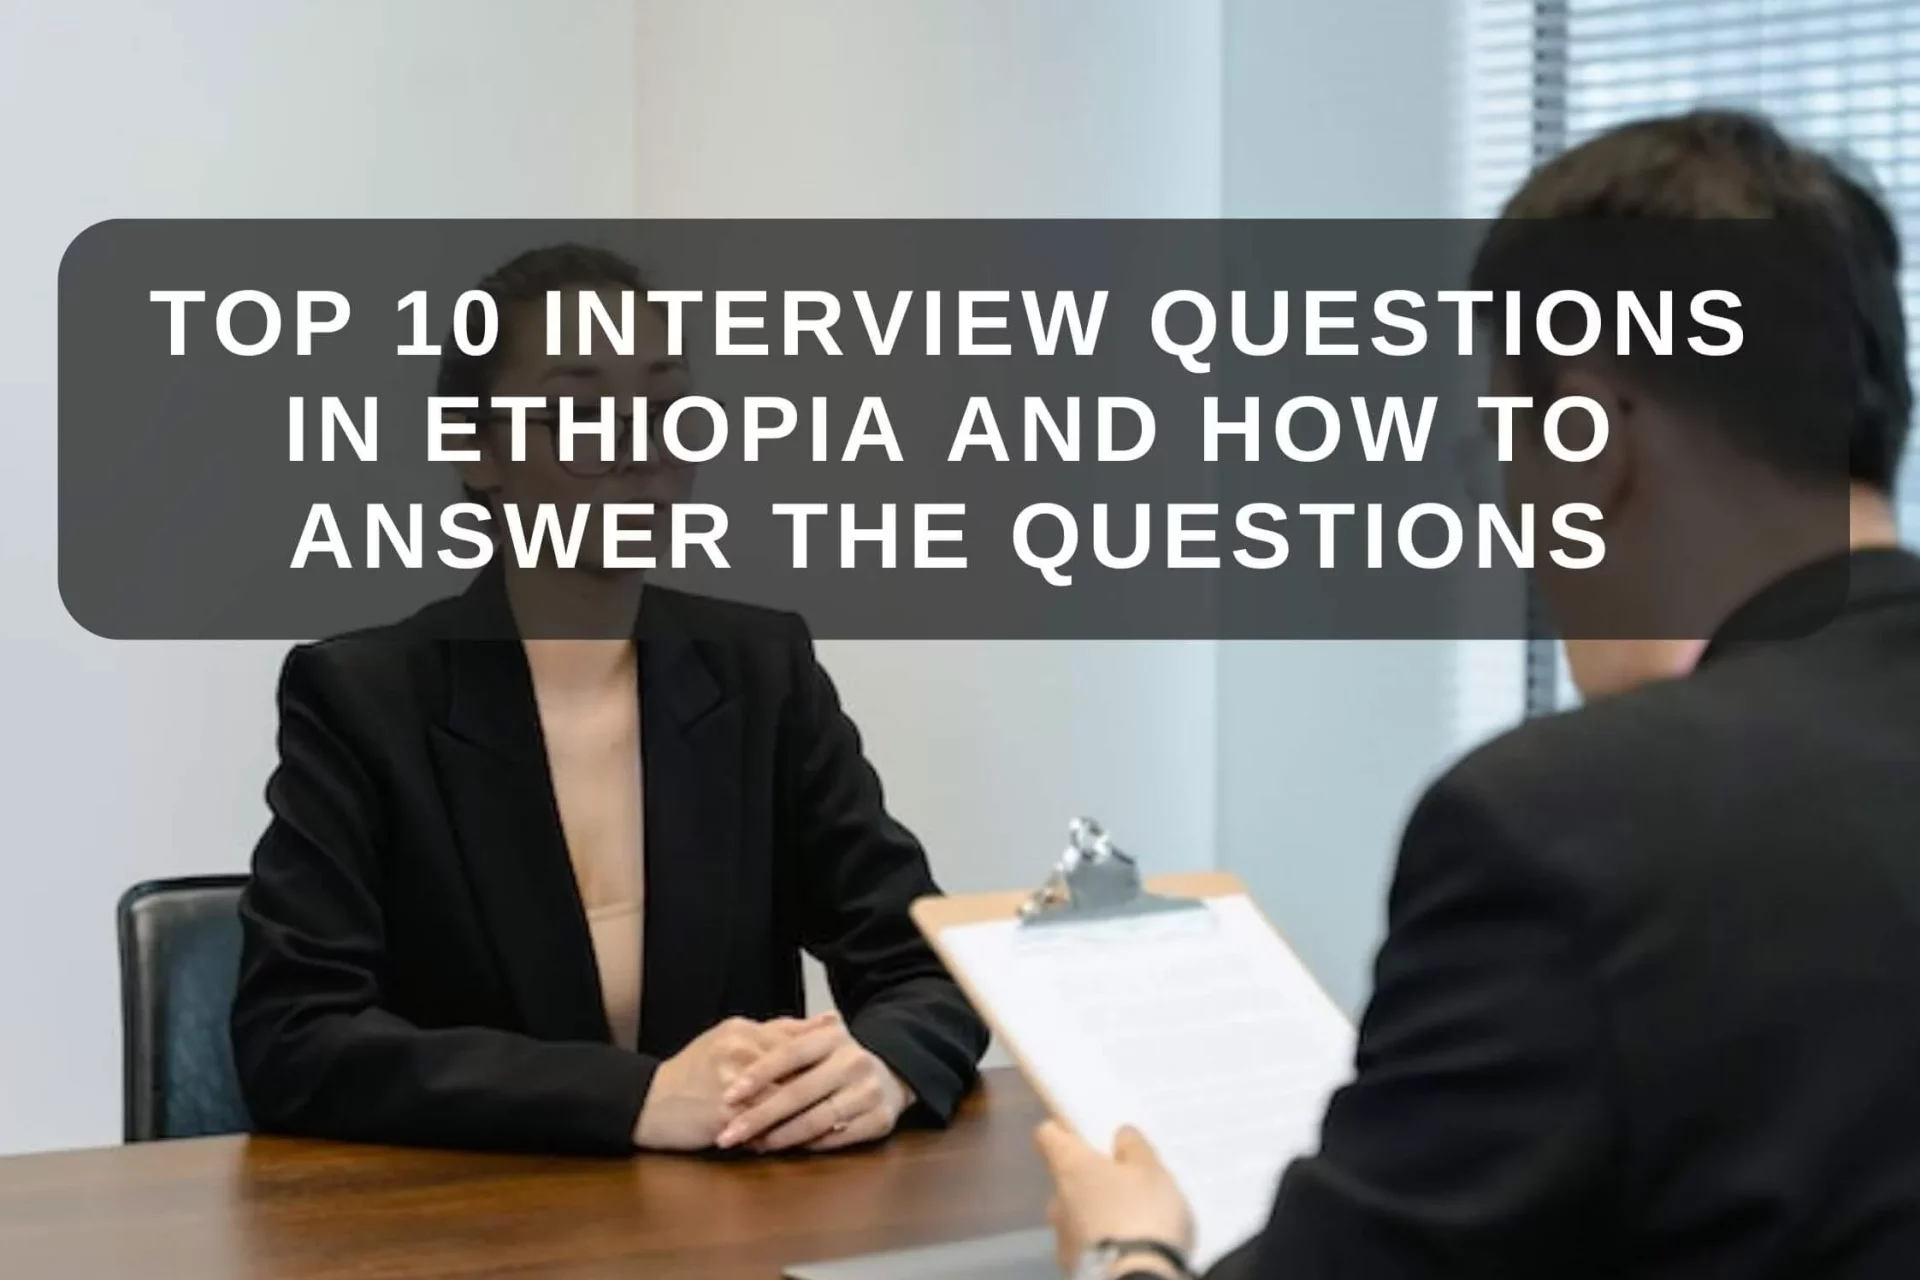 Top 10 Interview Questions in Ethiopia